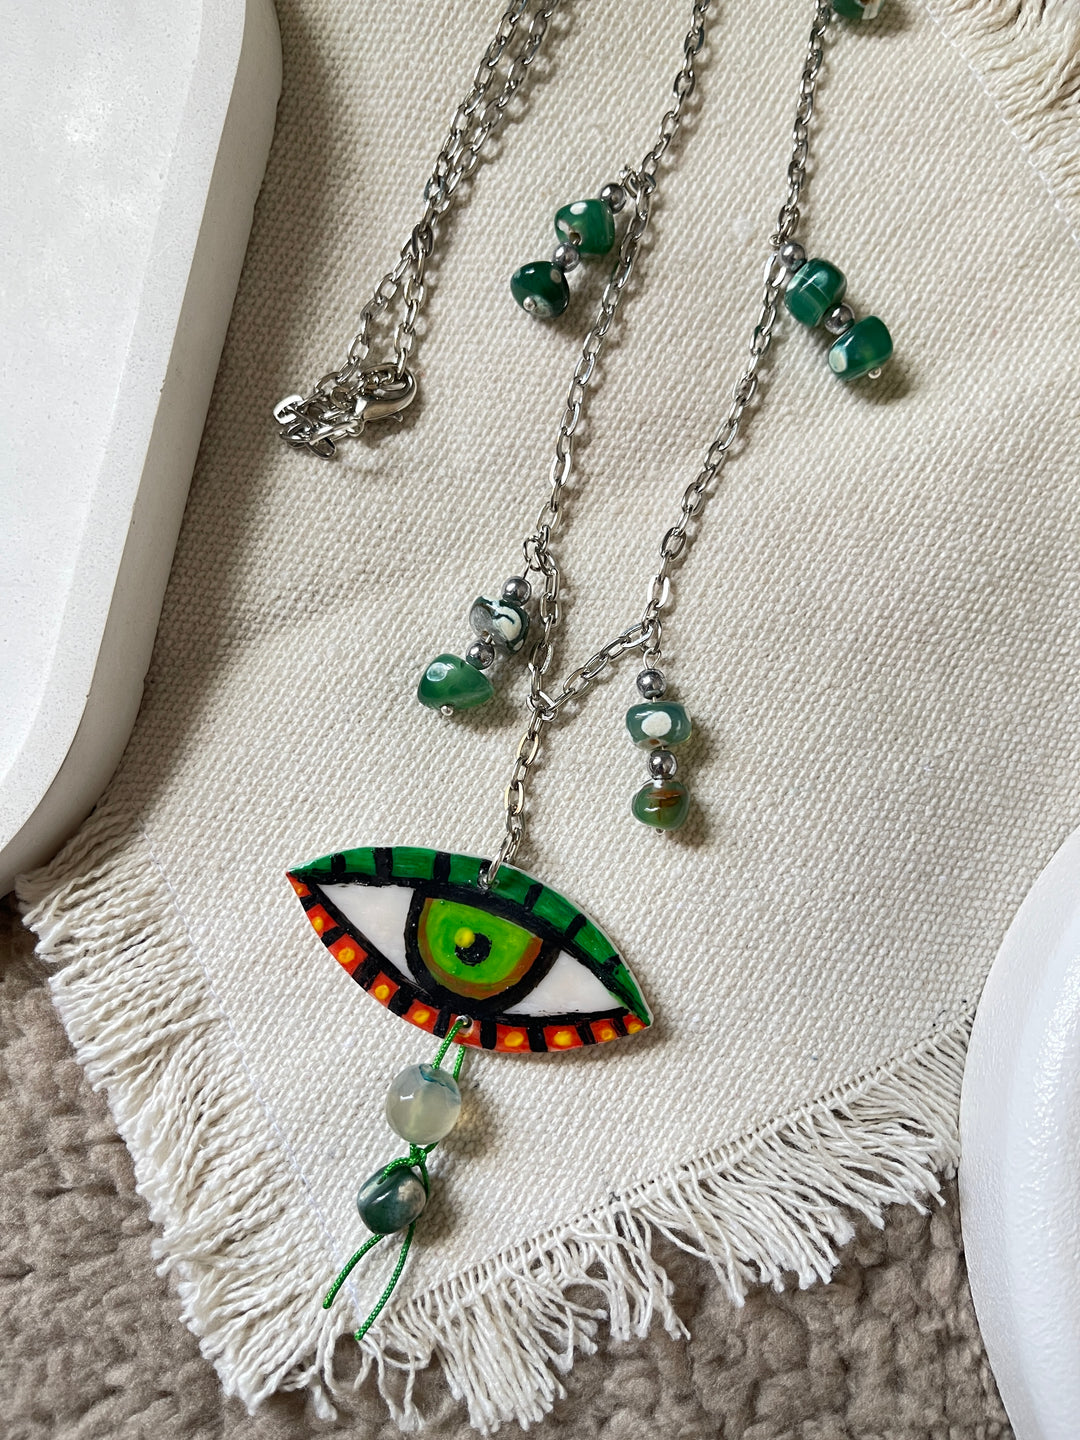 The eye in Green necklace